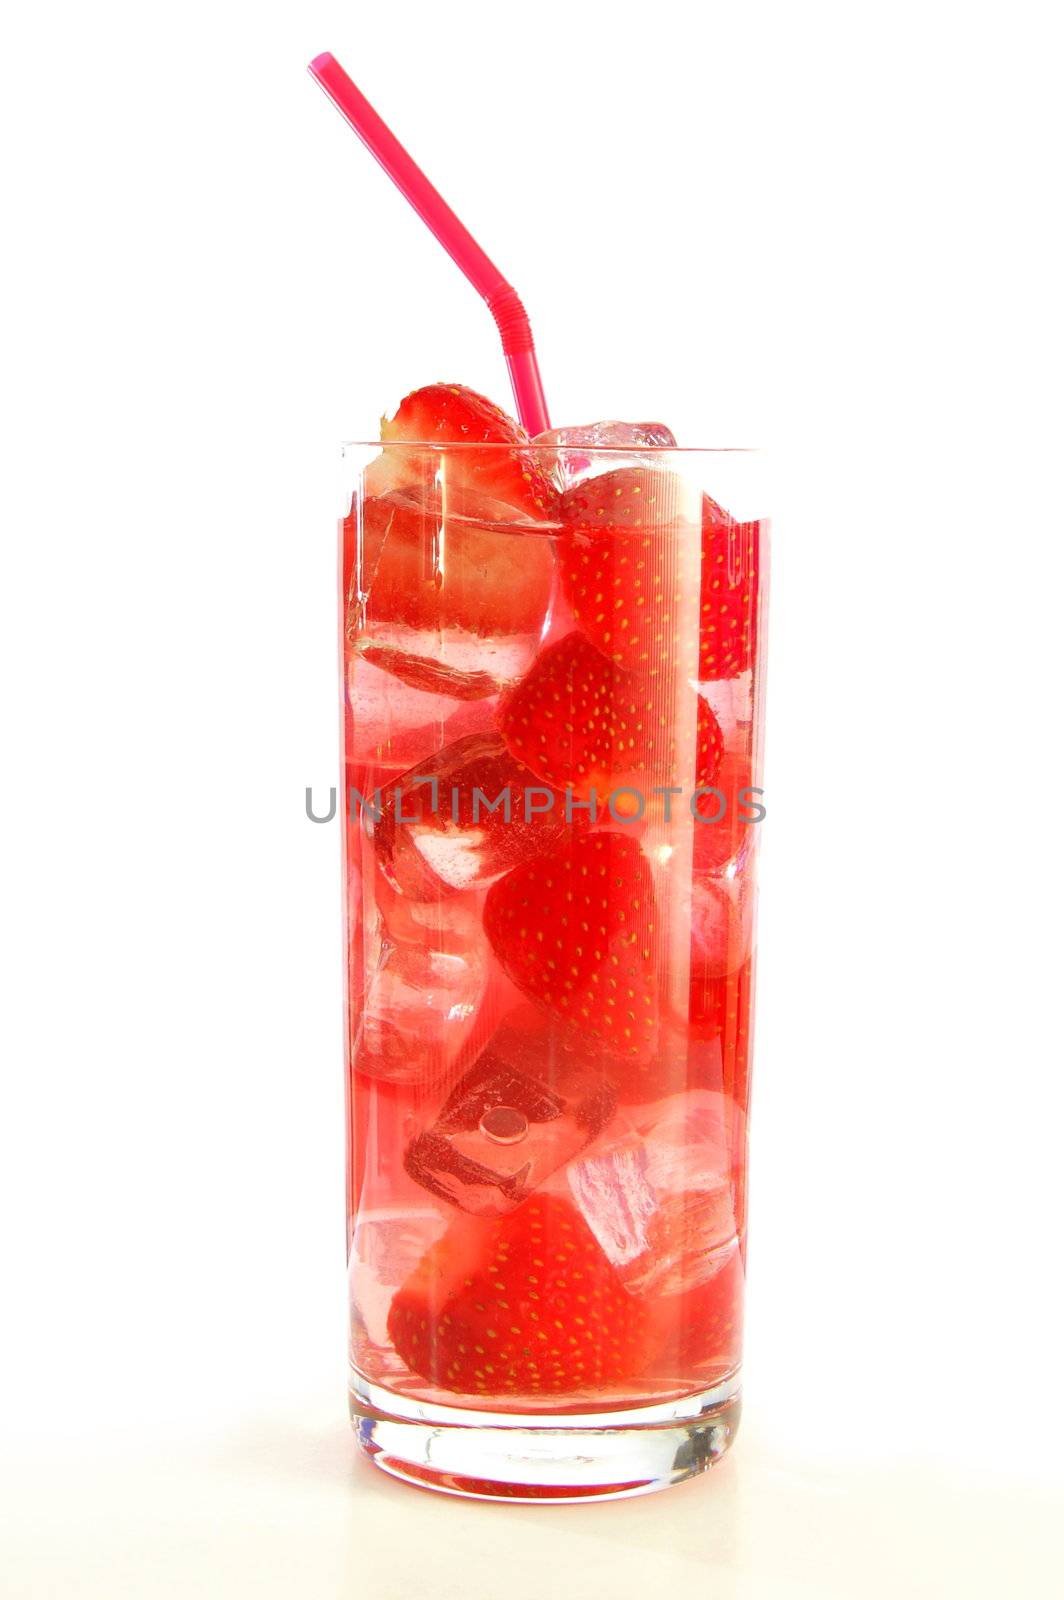 strawberry fruit juice or cocktail drink isolated on white